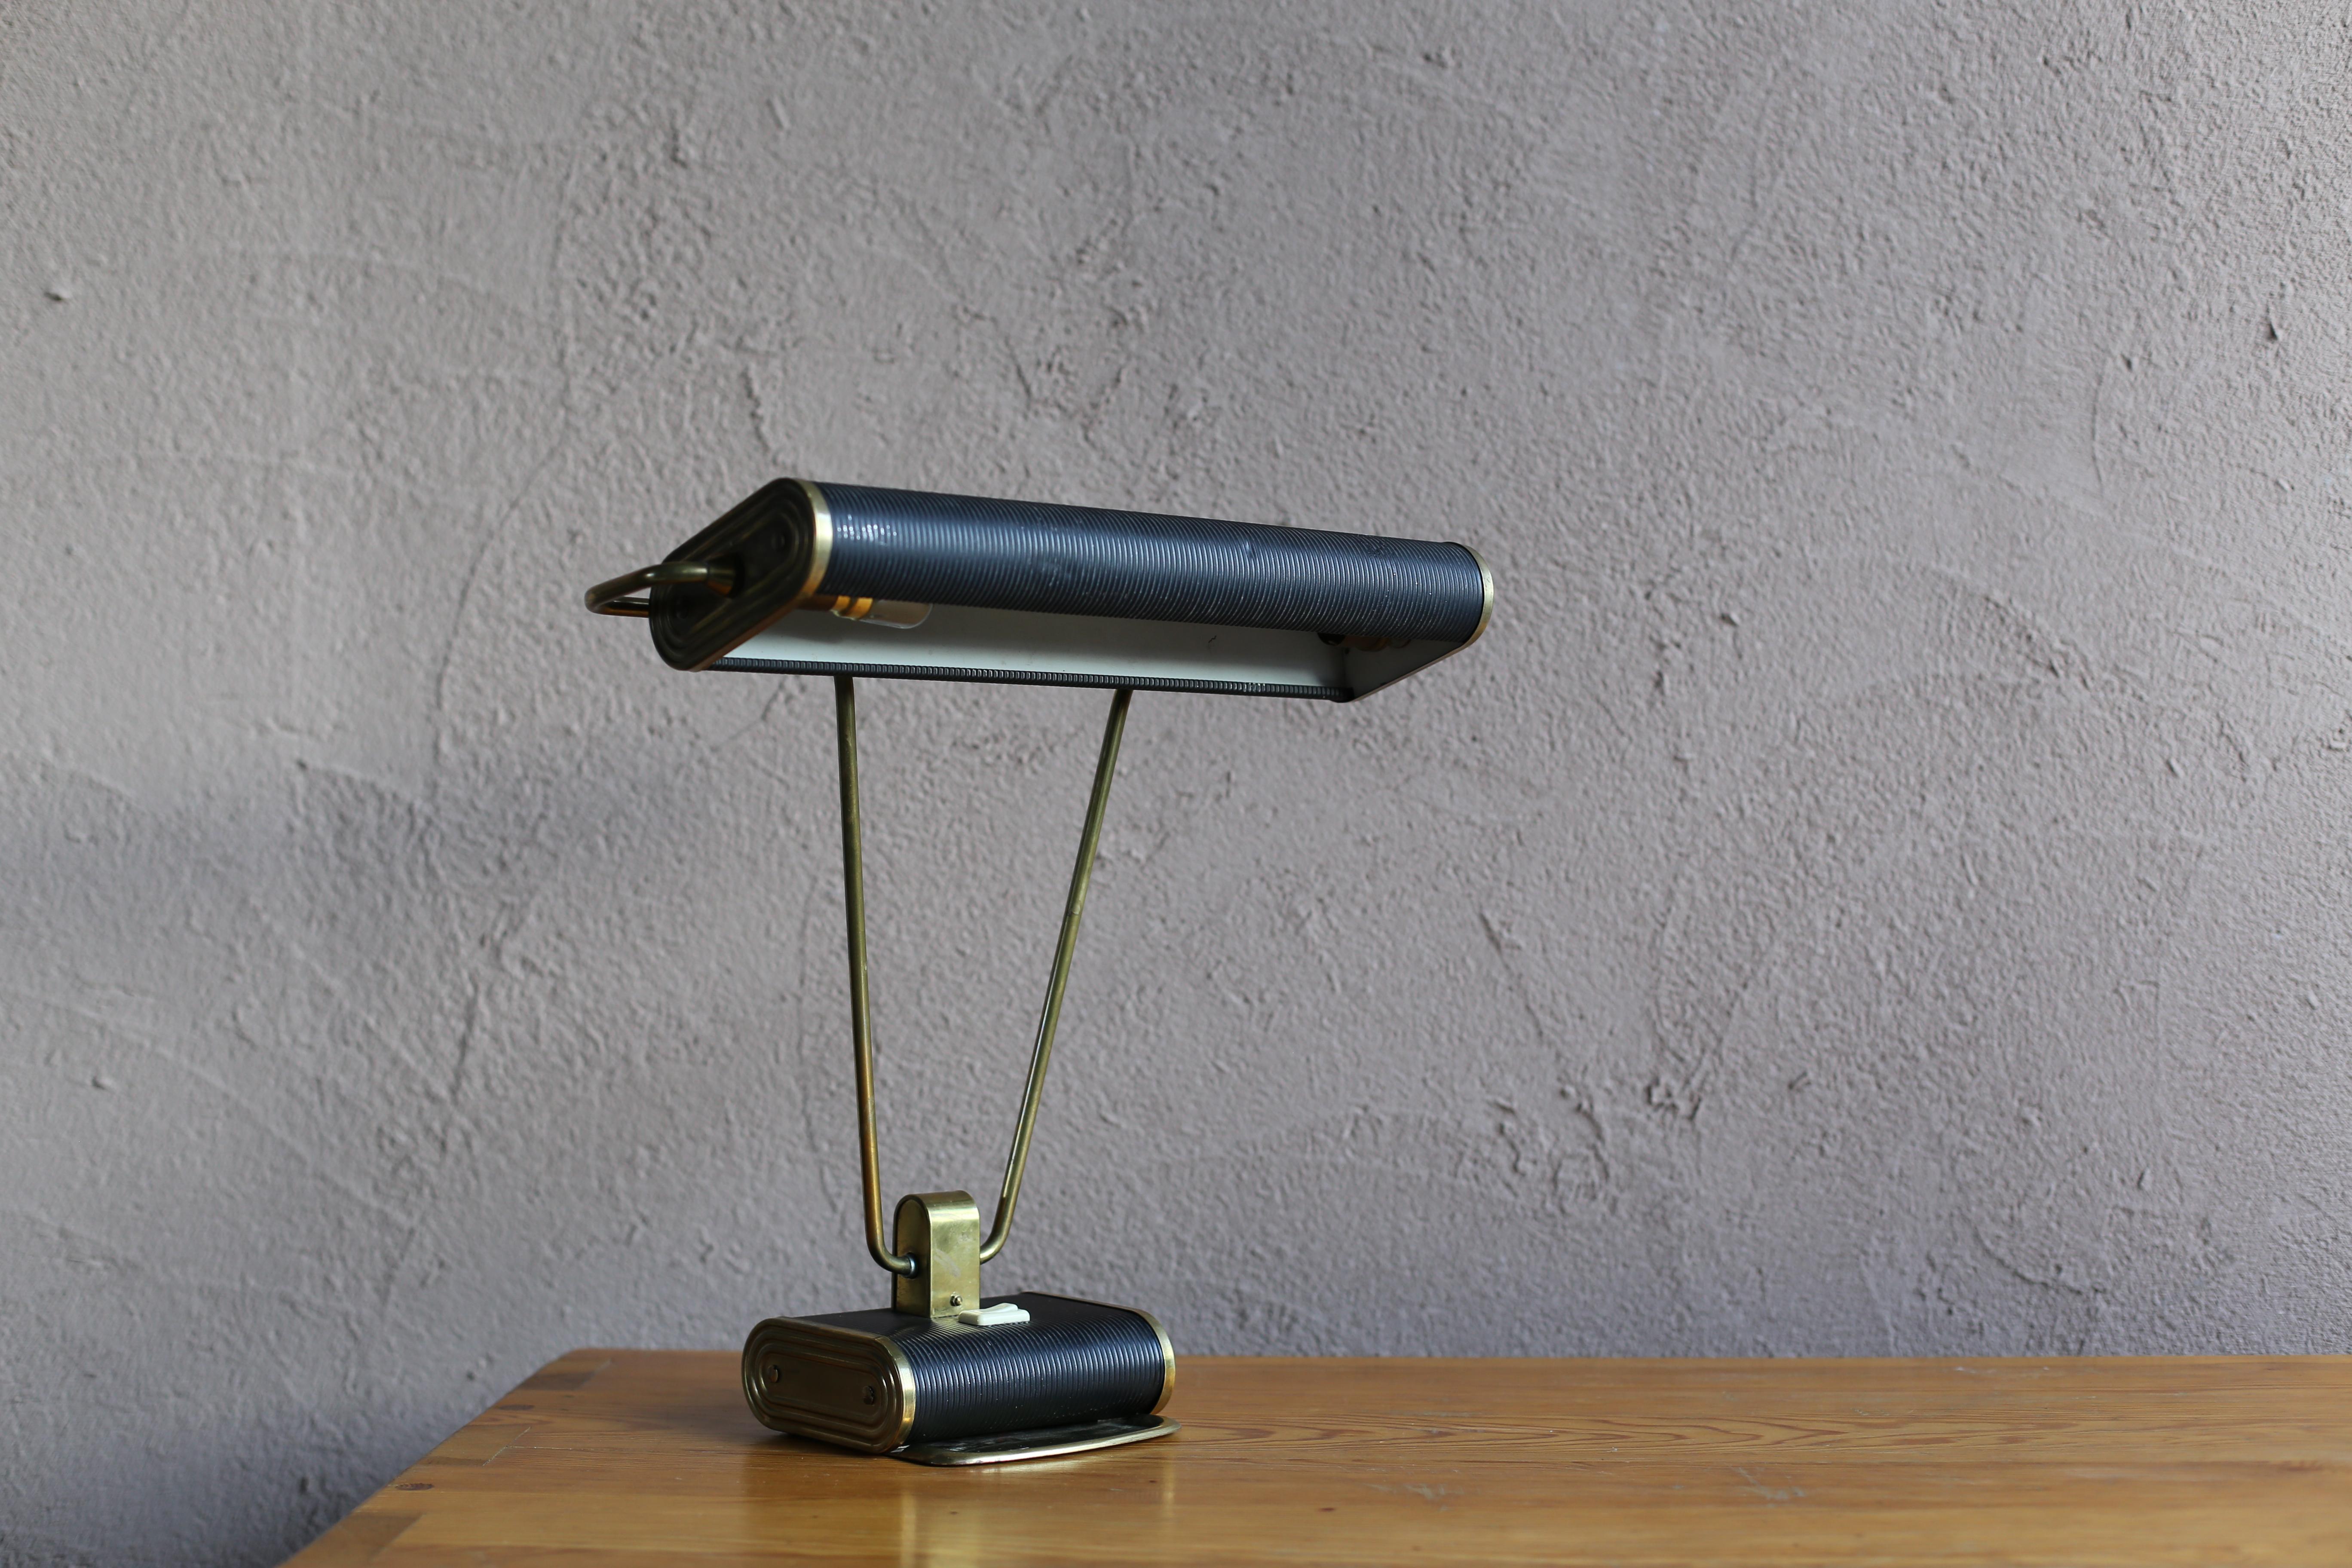 Vintage desk lamp designed by Eileen Gray. Manufacture is Maison Jumo from France. The arm and shade can each be moved a lot.